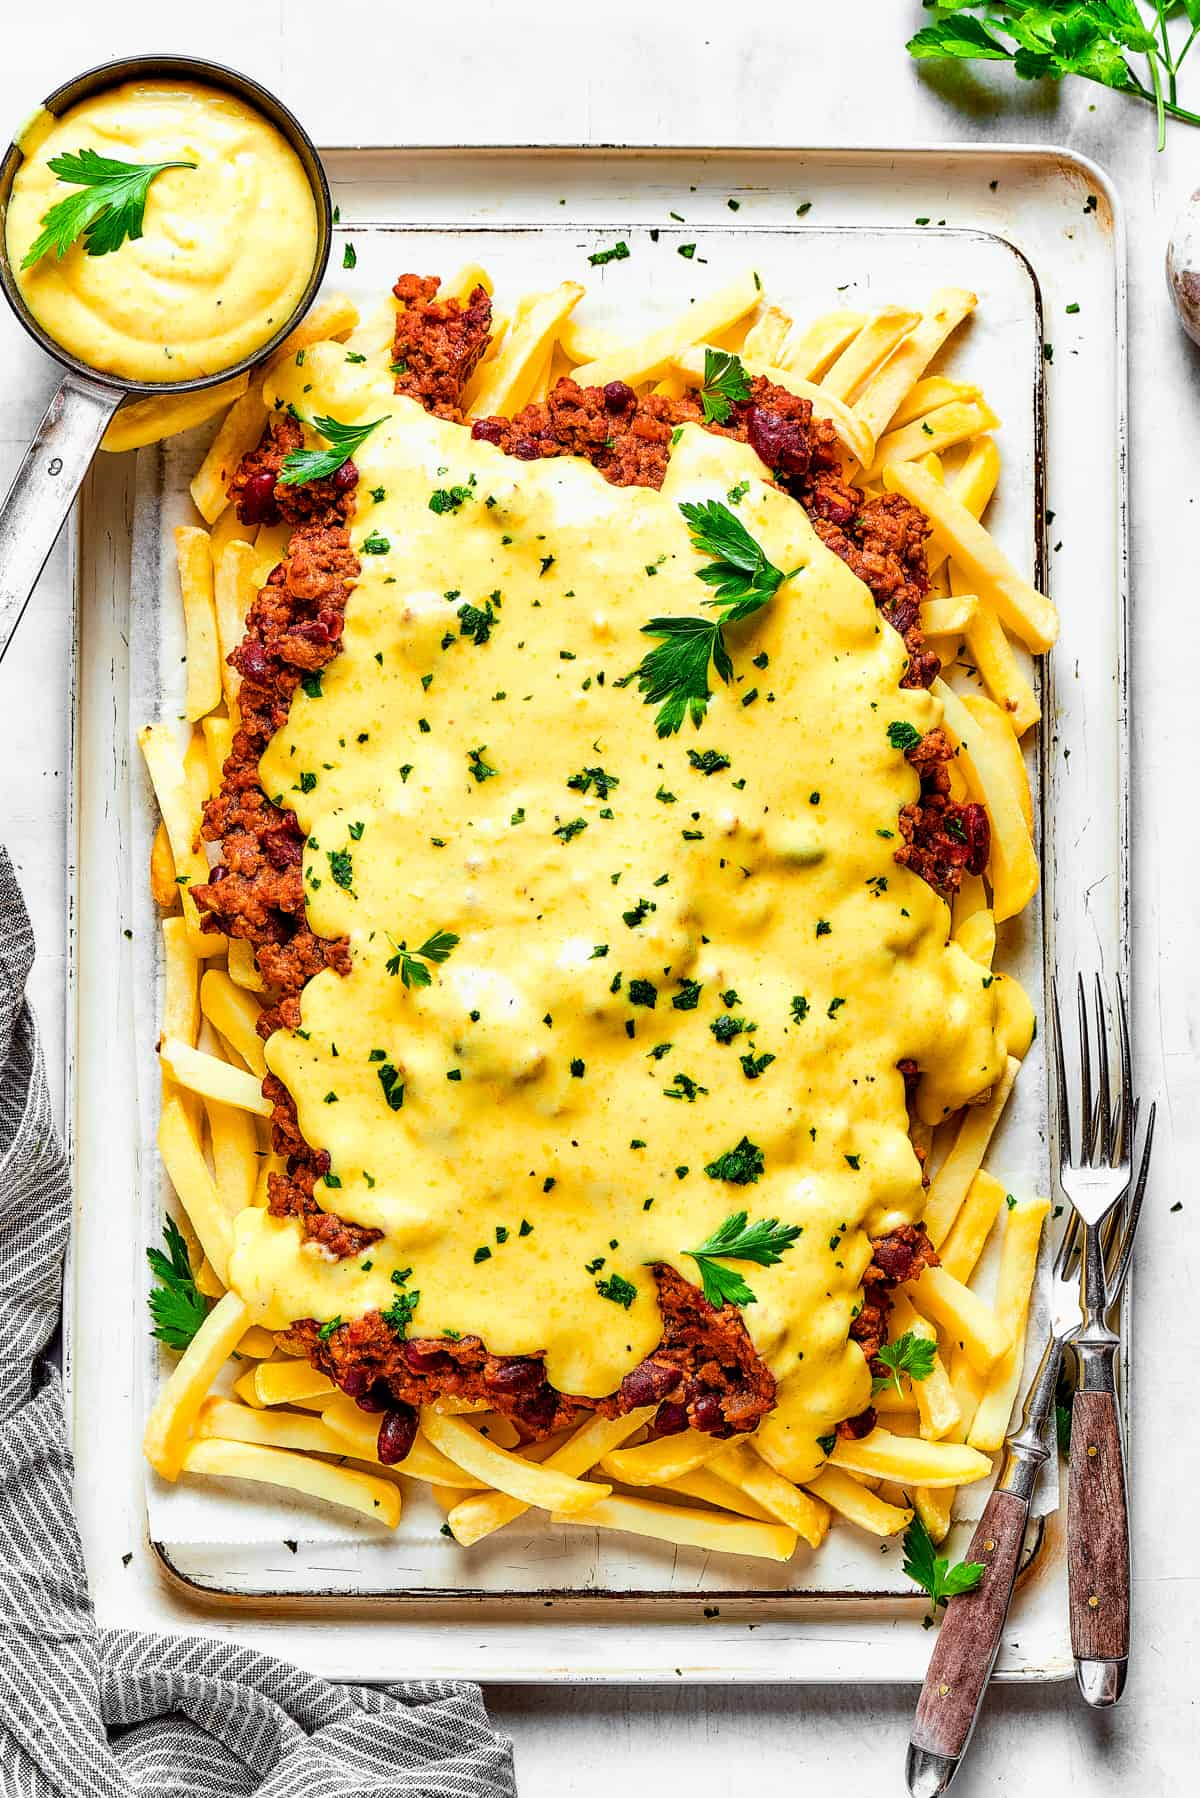 Cheese sauce poured over a batch of chili fries.